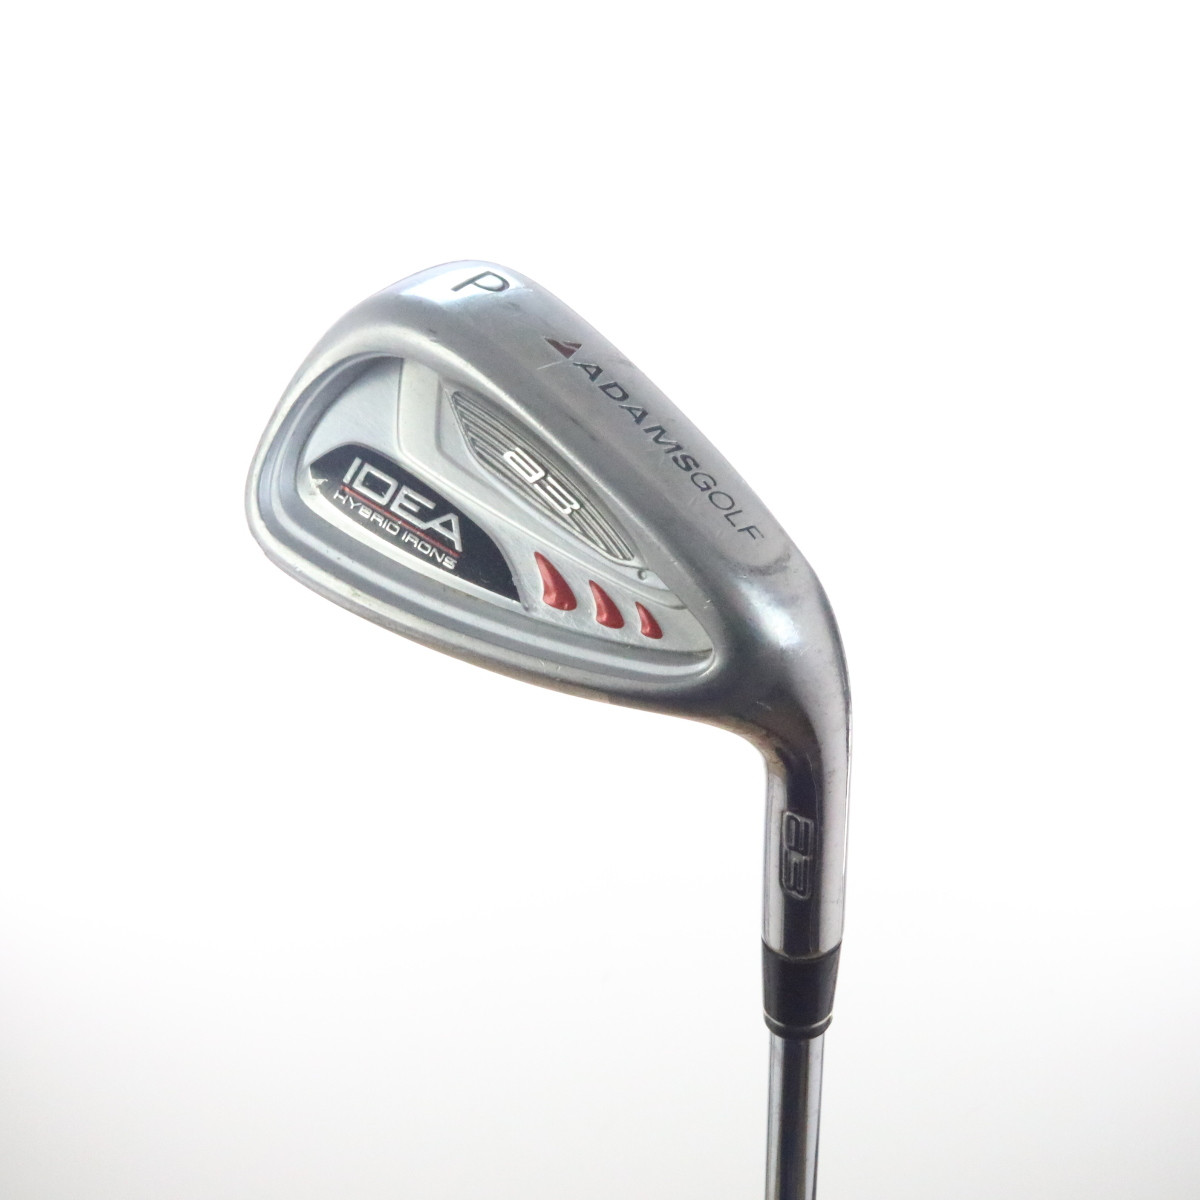 loft of pitching wedge